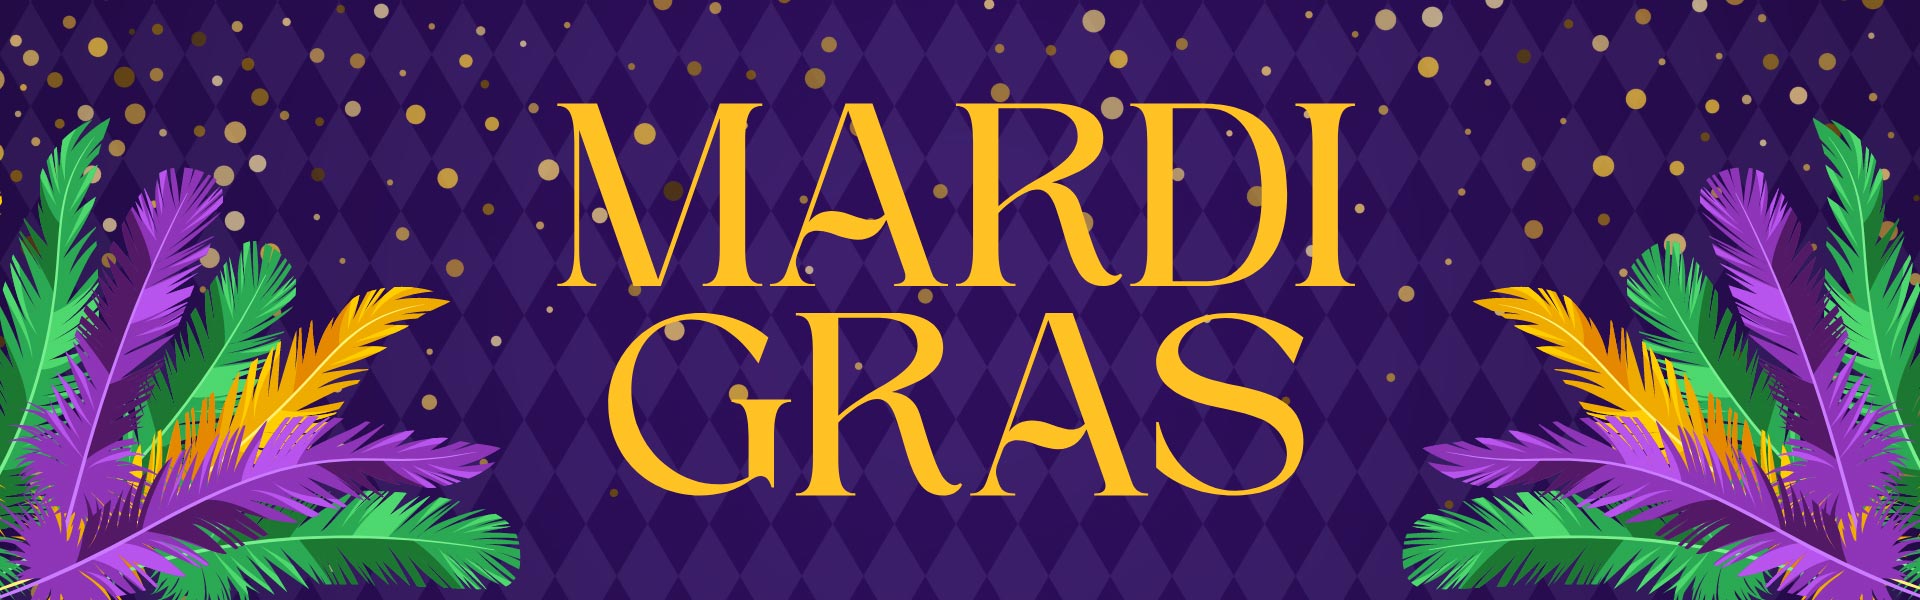 Stylized text: Mardi Gras with feathers and other design elements